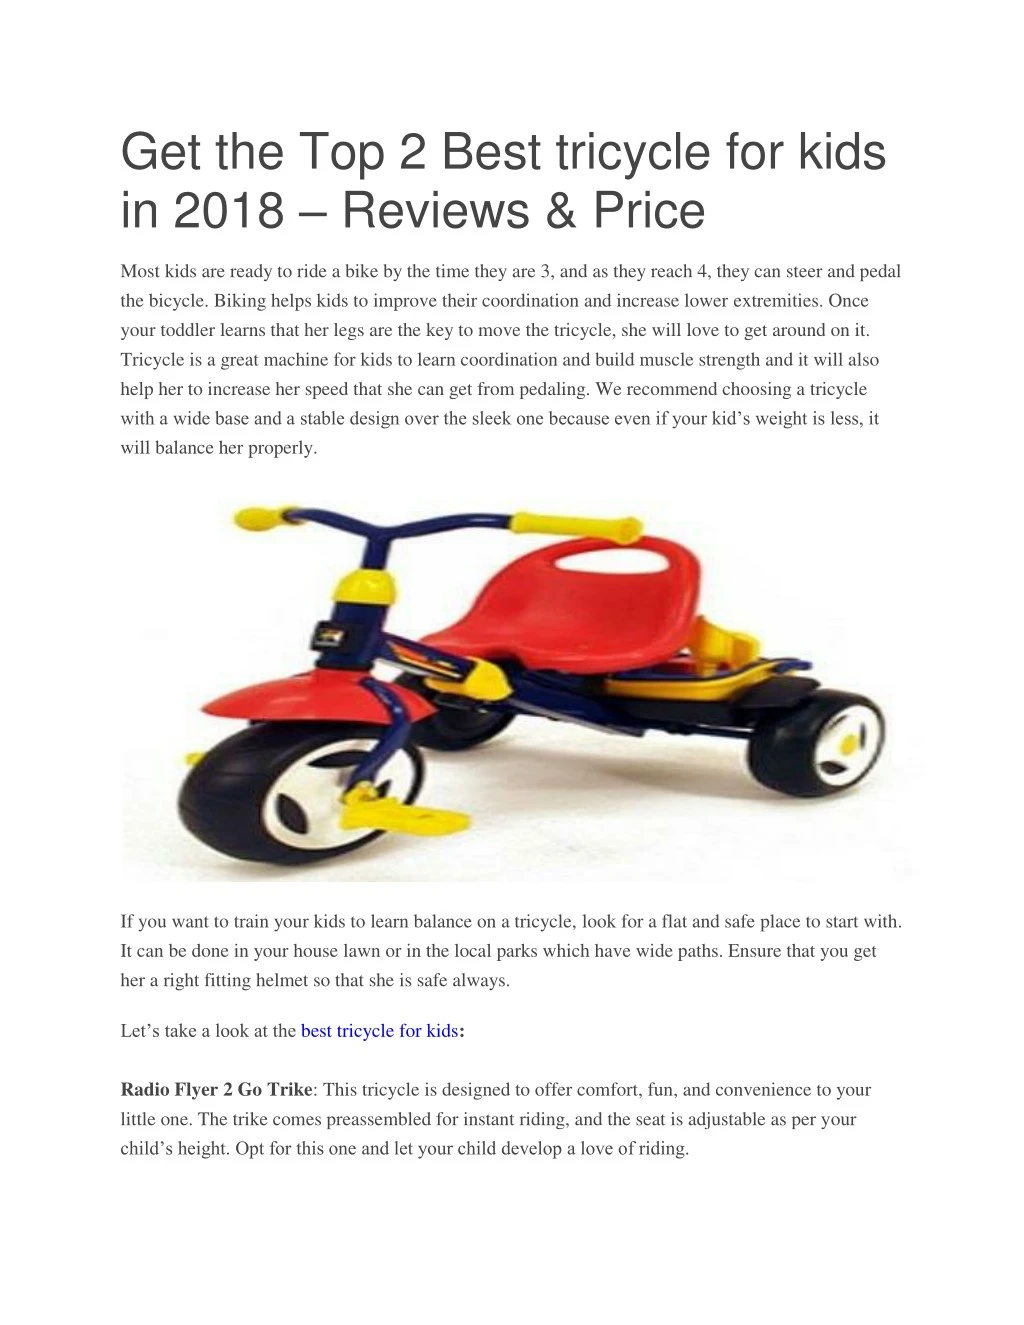 get the top 2 best tricycle for kids in 2018